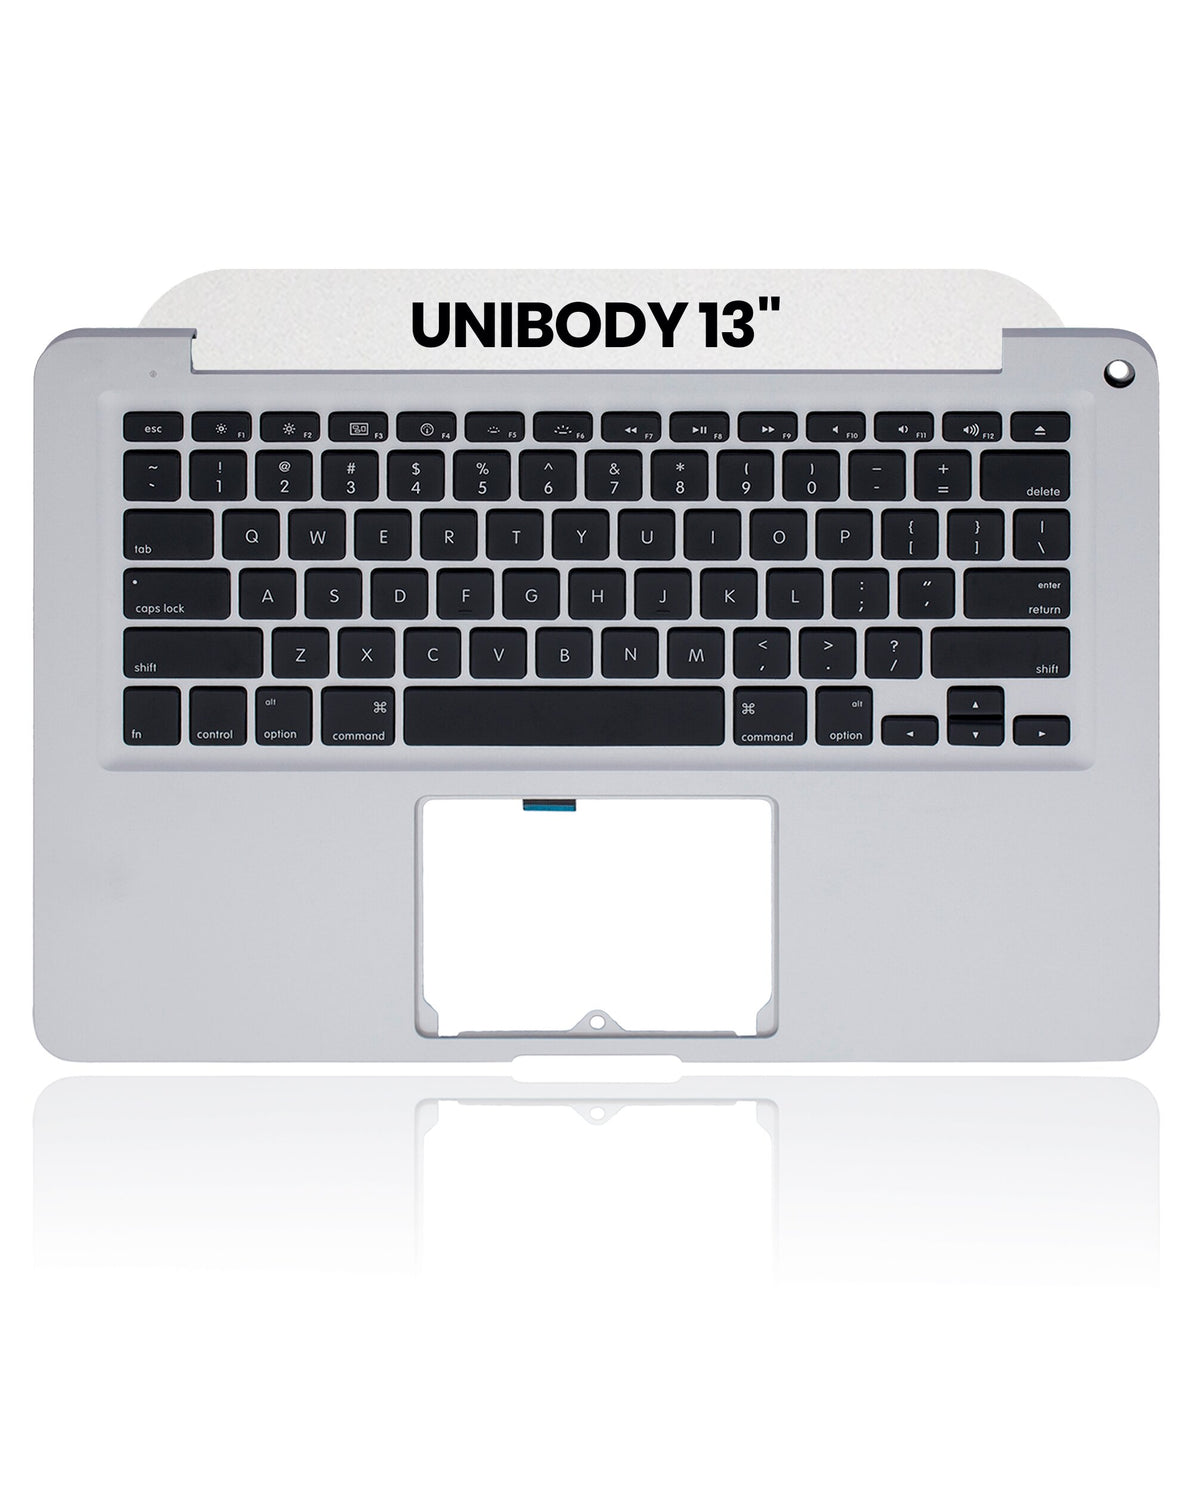 TOP CASE WITH KEYBOARD COMPATIBLE FOR MACBOOK UNIBODY 13" A1278 (LATE 2008) (US ENGLISH)